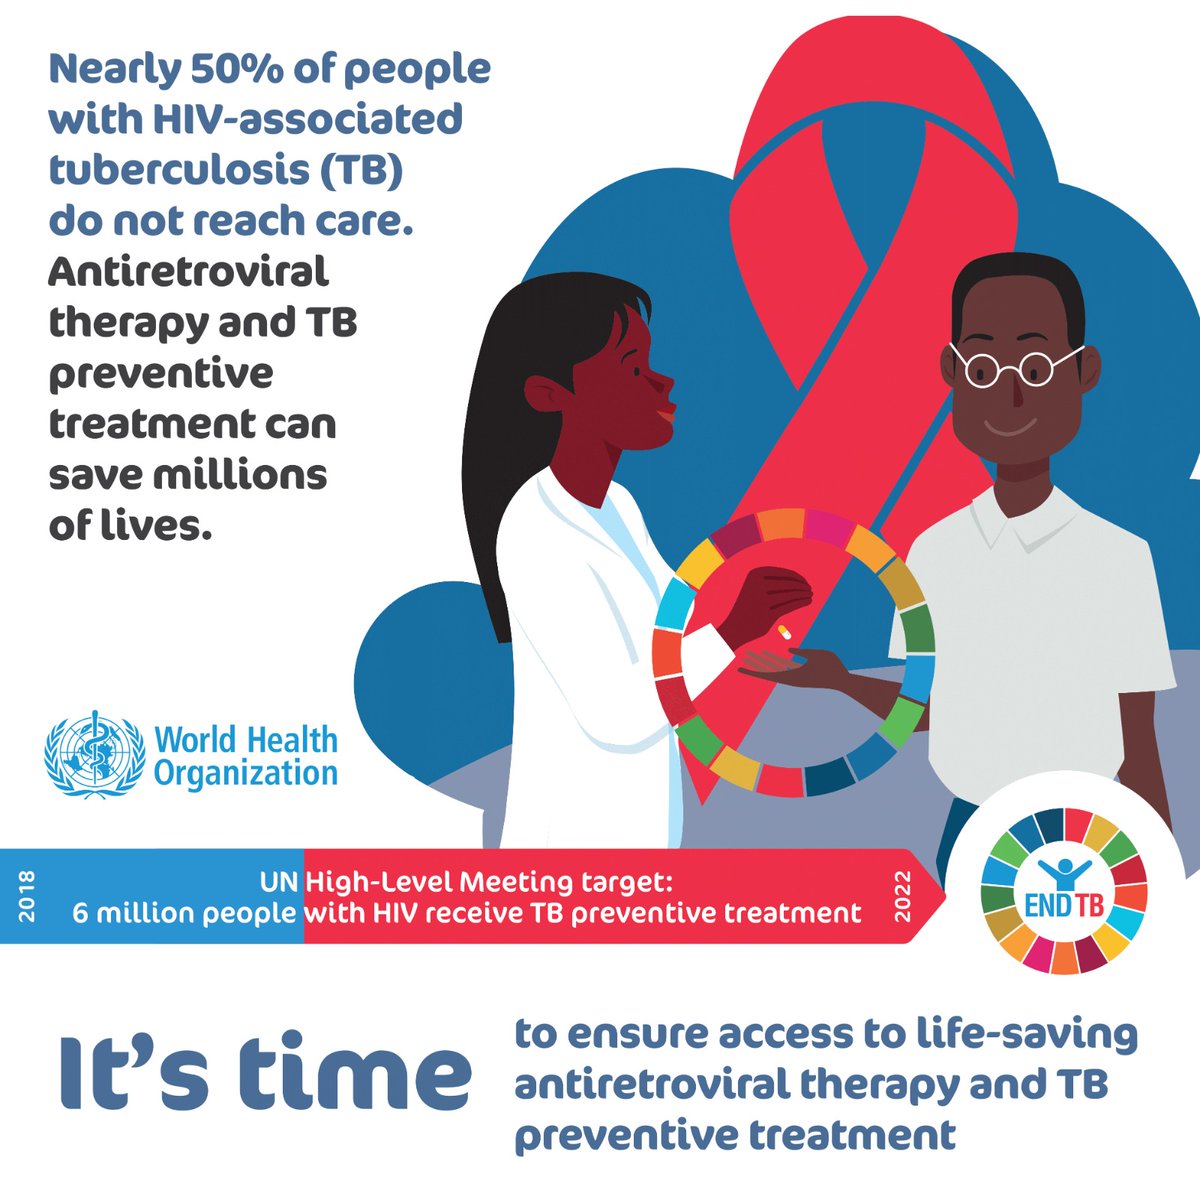 Did you know that PLHIV are more susceptible to #TB? Protect your health with TB preventive therapy- it can greatly reduce the risk of developing active TB-keeping them healthier and stronger! @MoHCCZim @CDCgov @USEmbZim @frontlineaids @UNAIDS #tbawareness #stoptb #healthforall